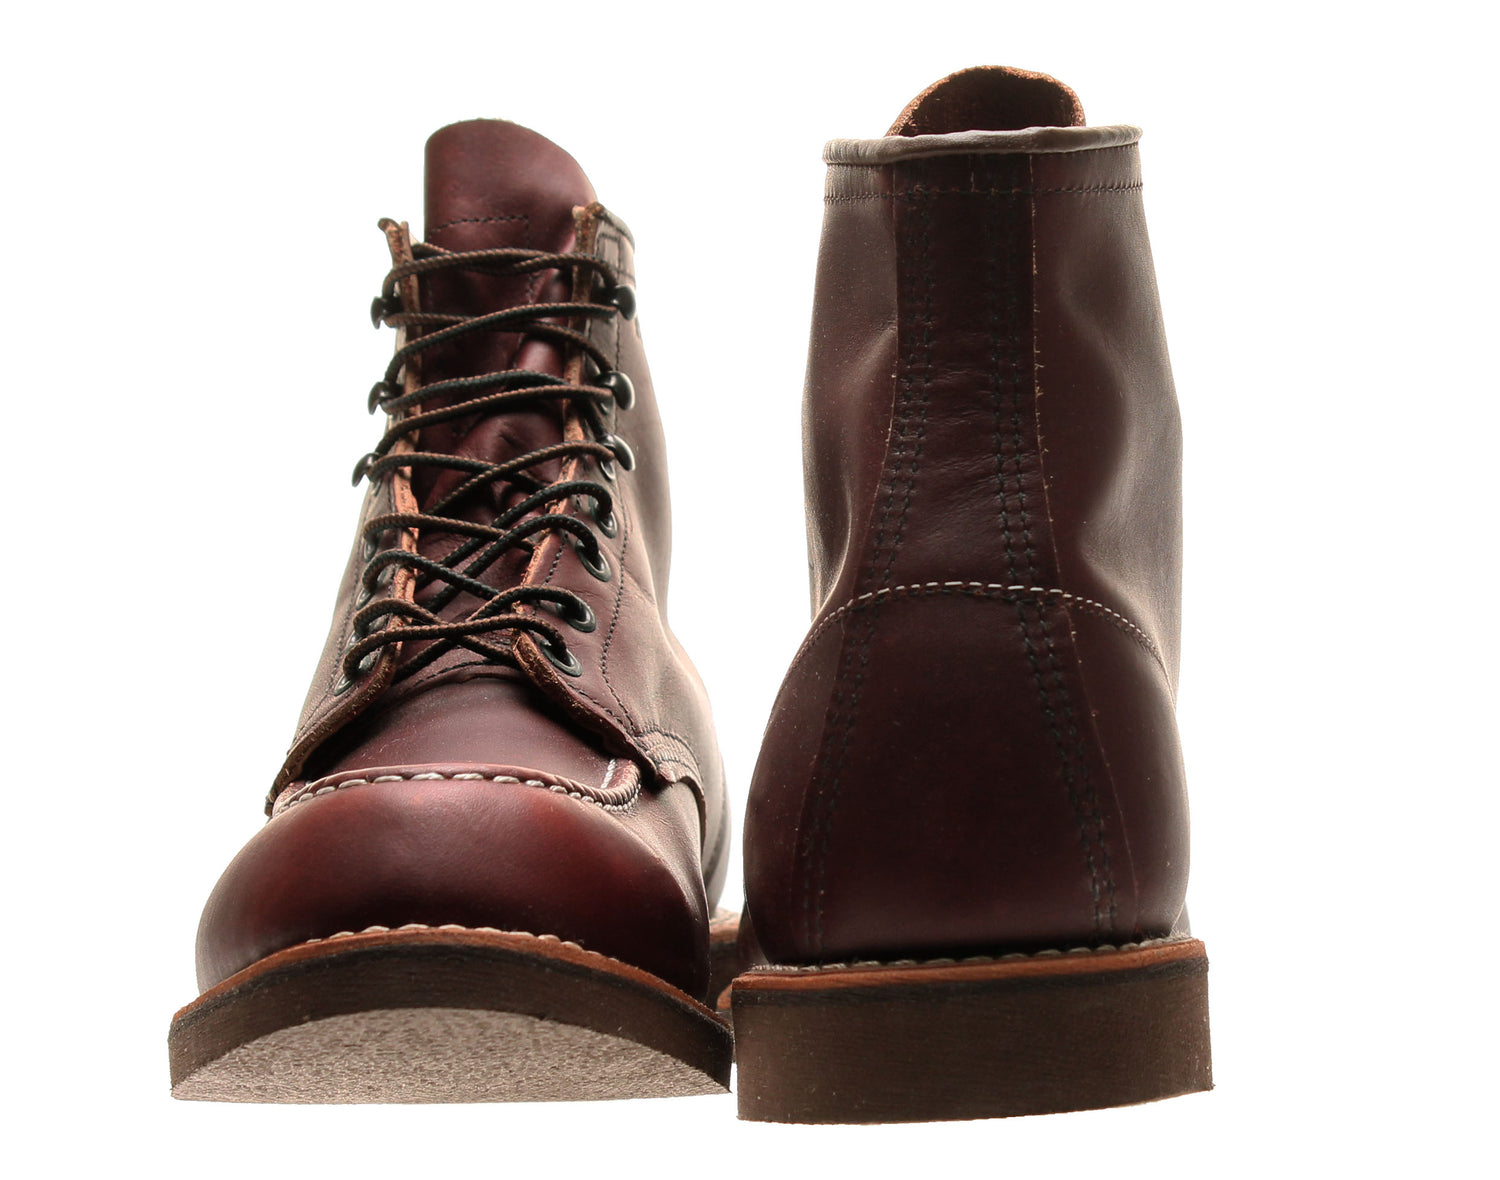 Red Wing Heritage 213 6-Inch Moc Toe Oxblood Men's Boots